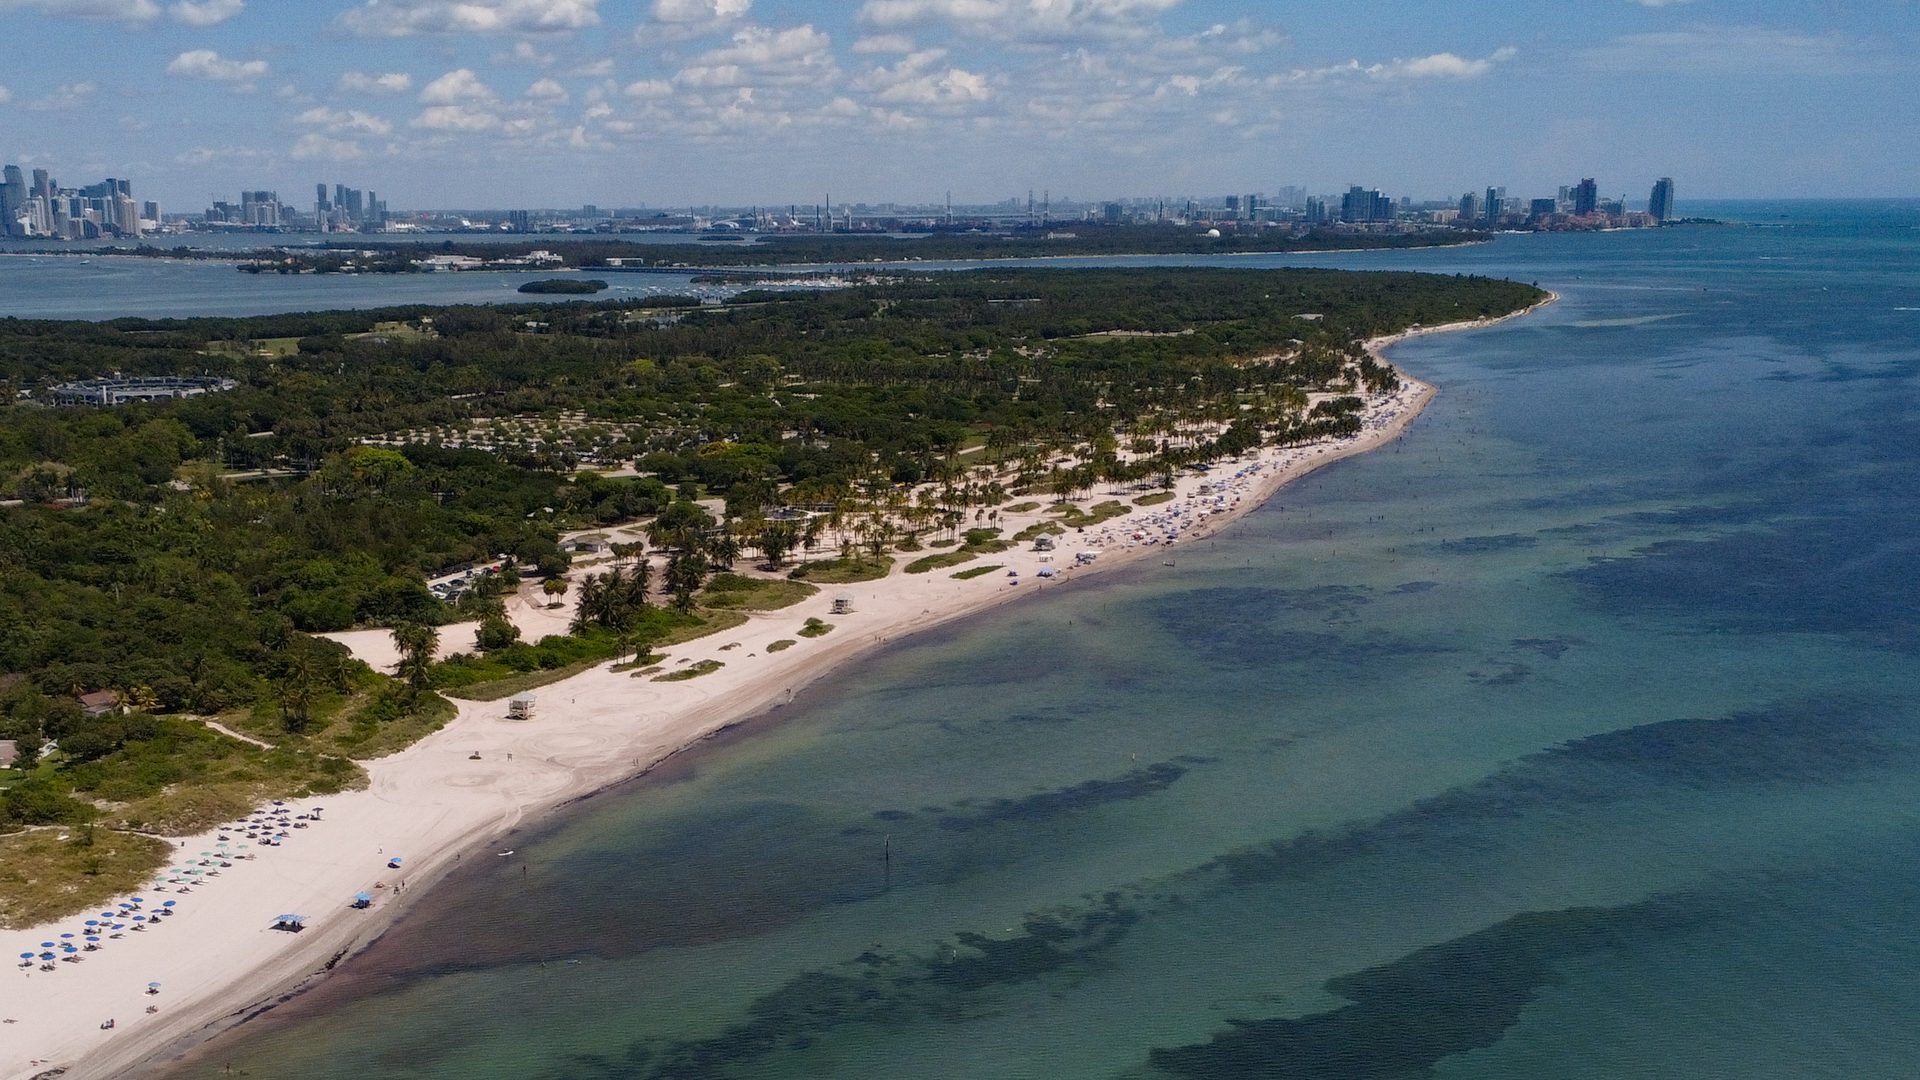 Some Key Biscayne beaches cleared for swimming after sewage plant